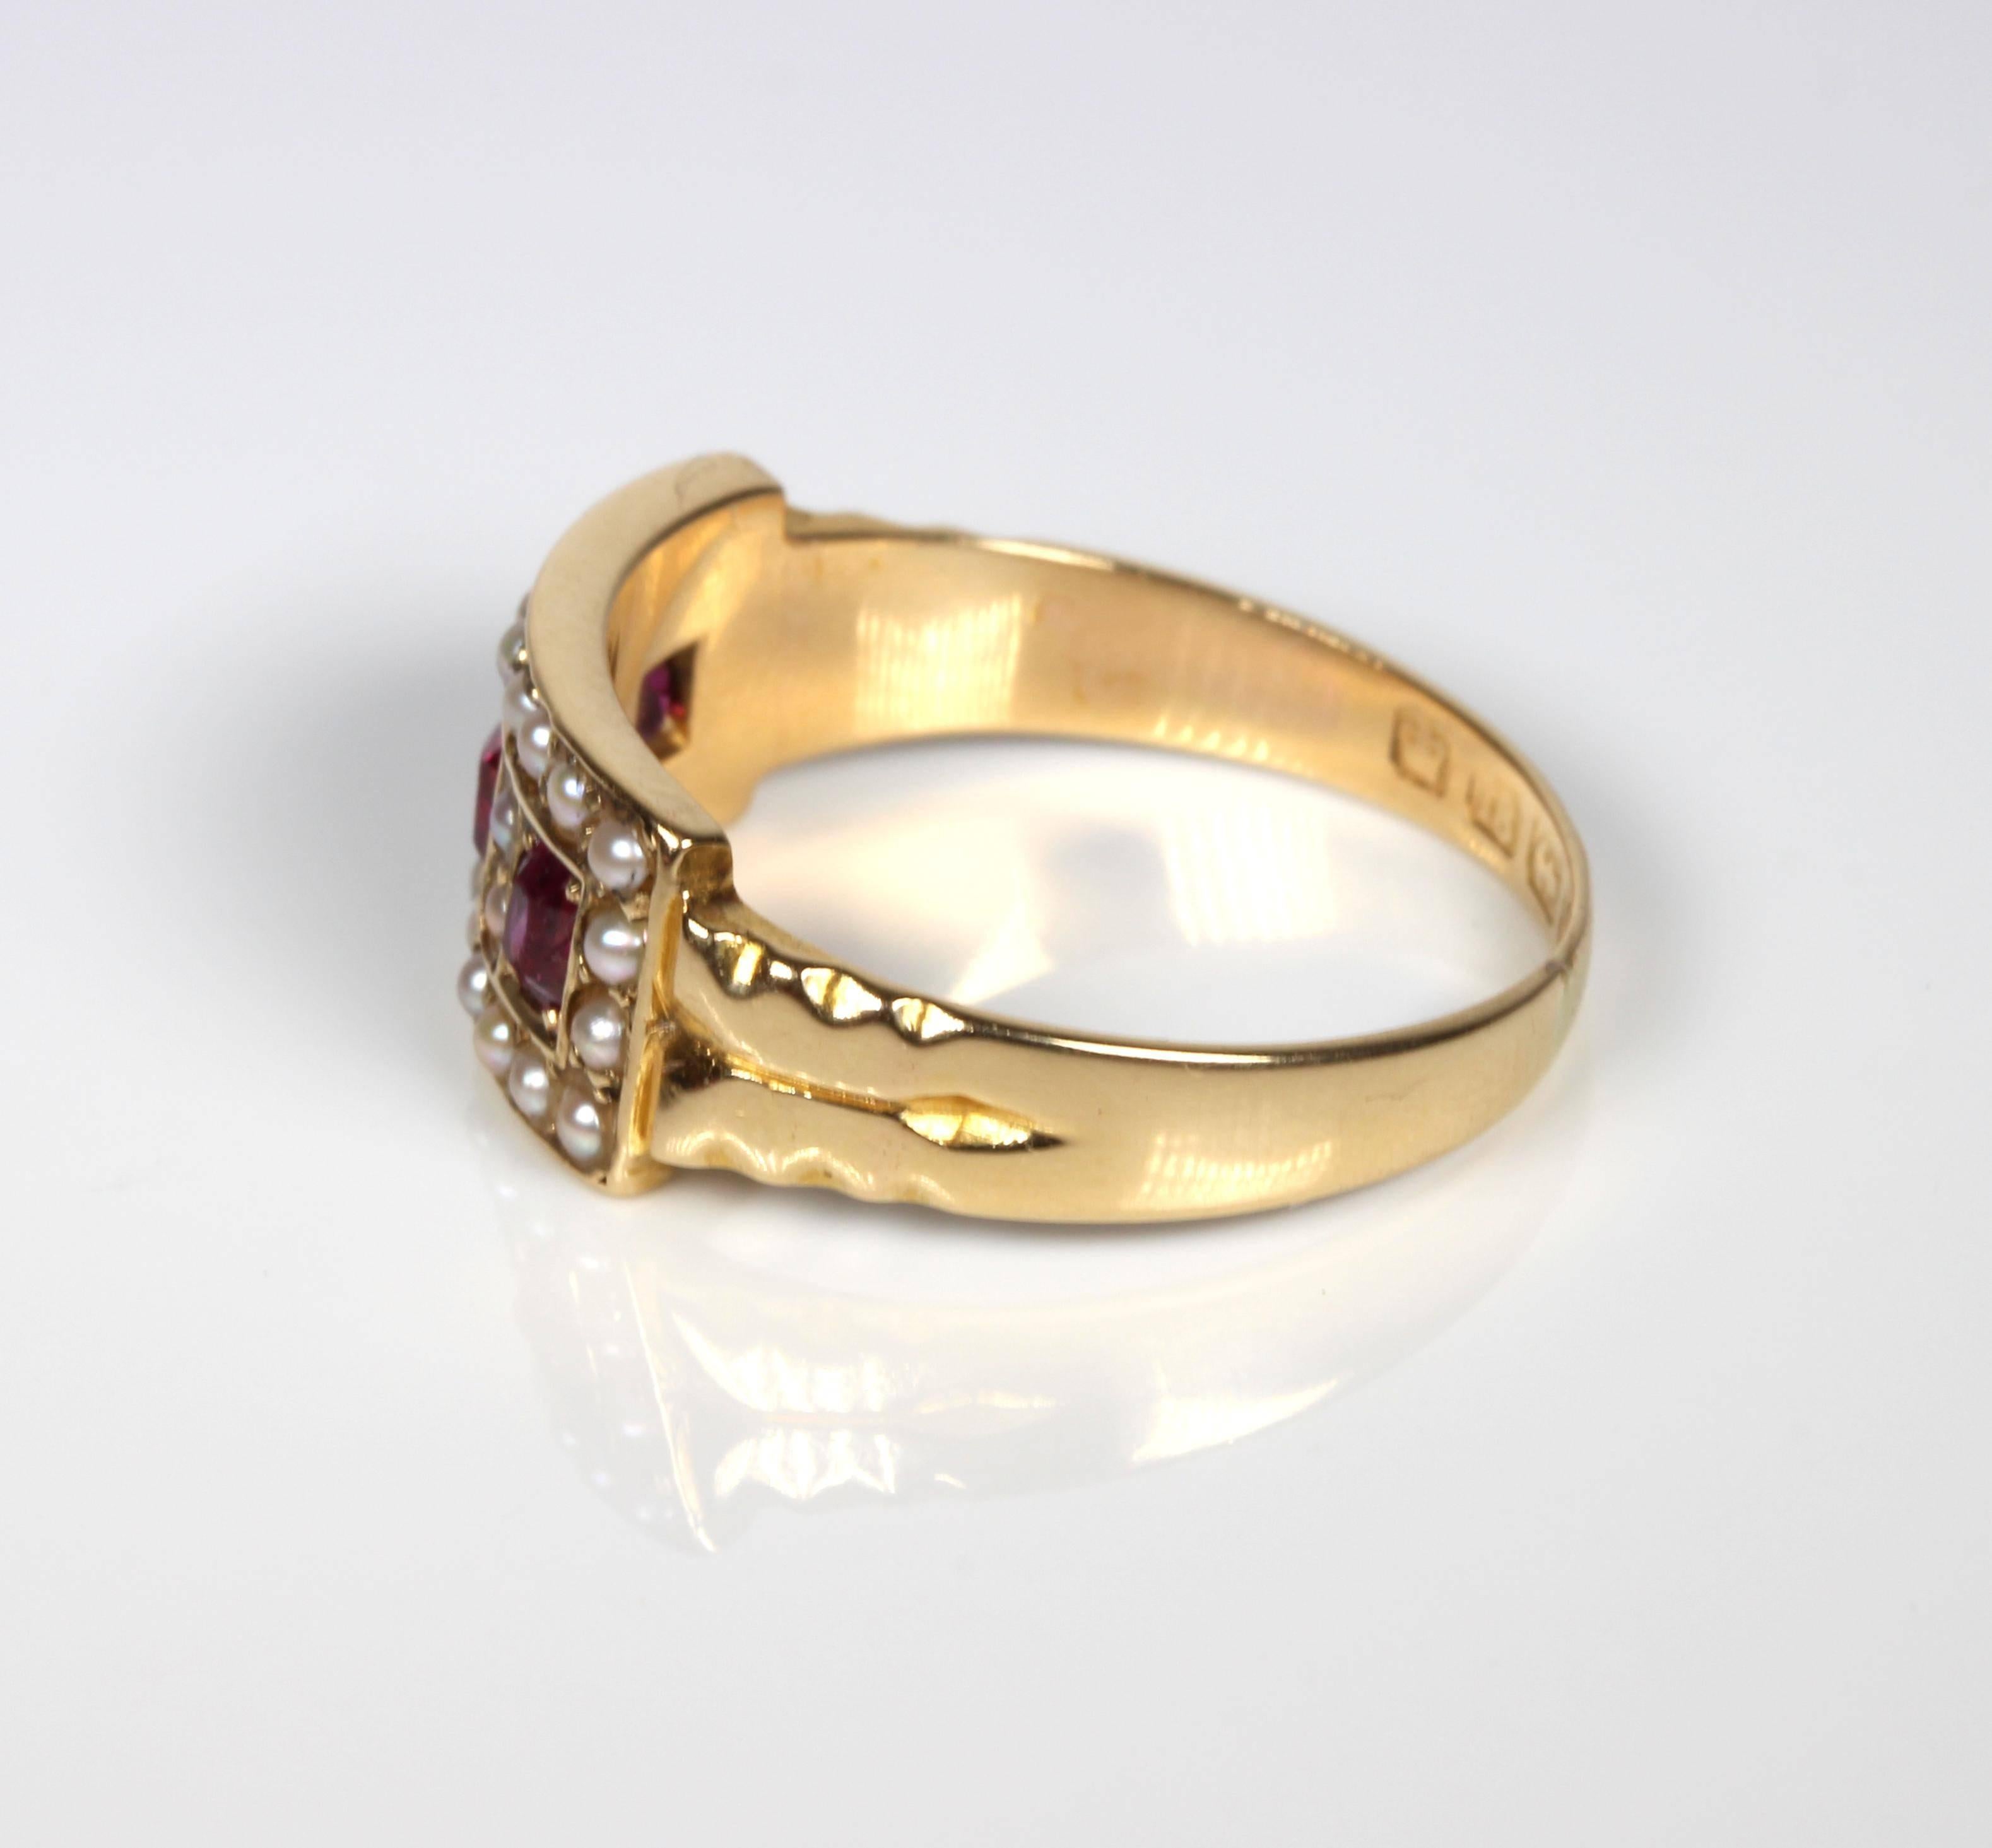 Stylish ruby and seed pearl dress ring set in 18ct gold with 3 oval facetted rubies and 26 seed pearls. Hallmarked for Birmingham 1893. Currently size N 1/2 (US=7) and can be safely sized by our expert jewellers. 18ct gold, English, Birmingham 1893.